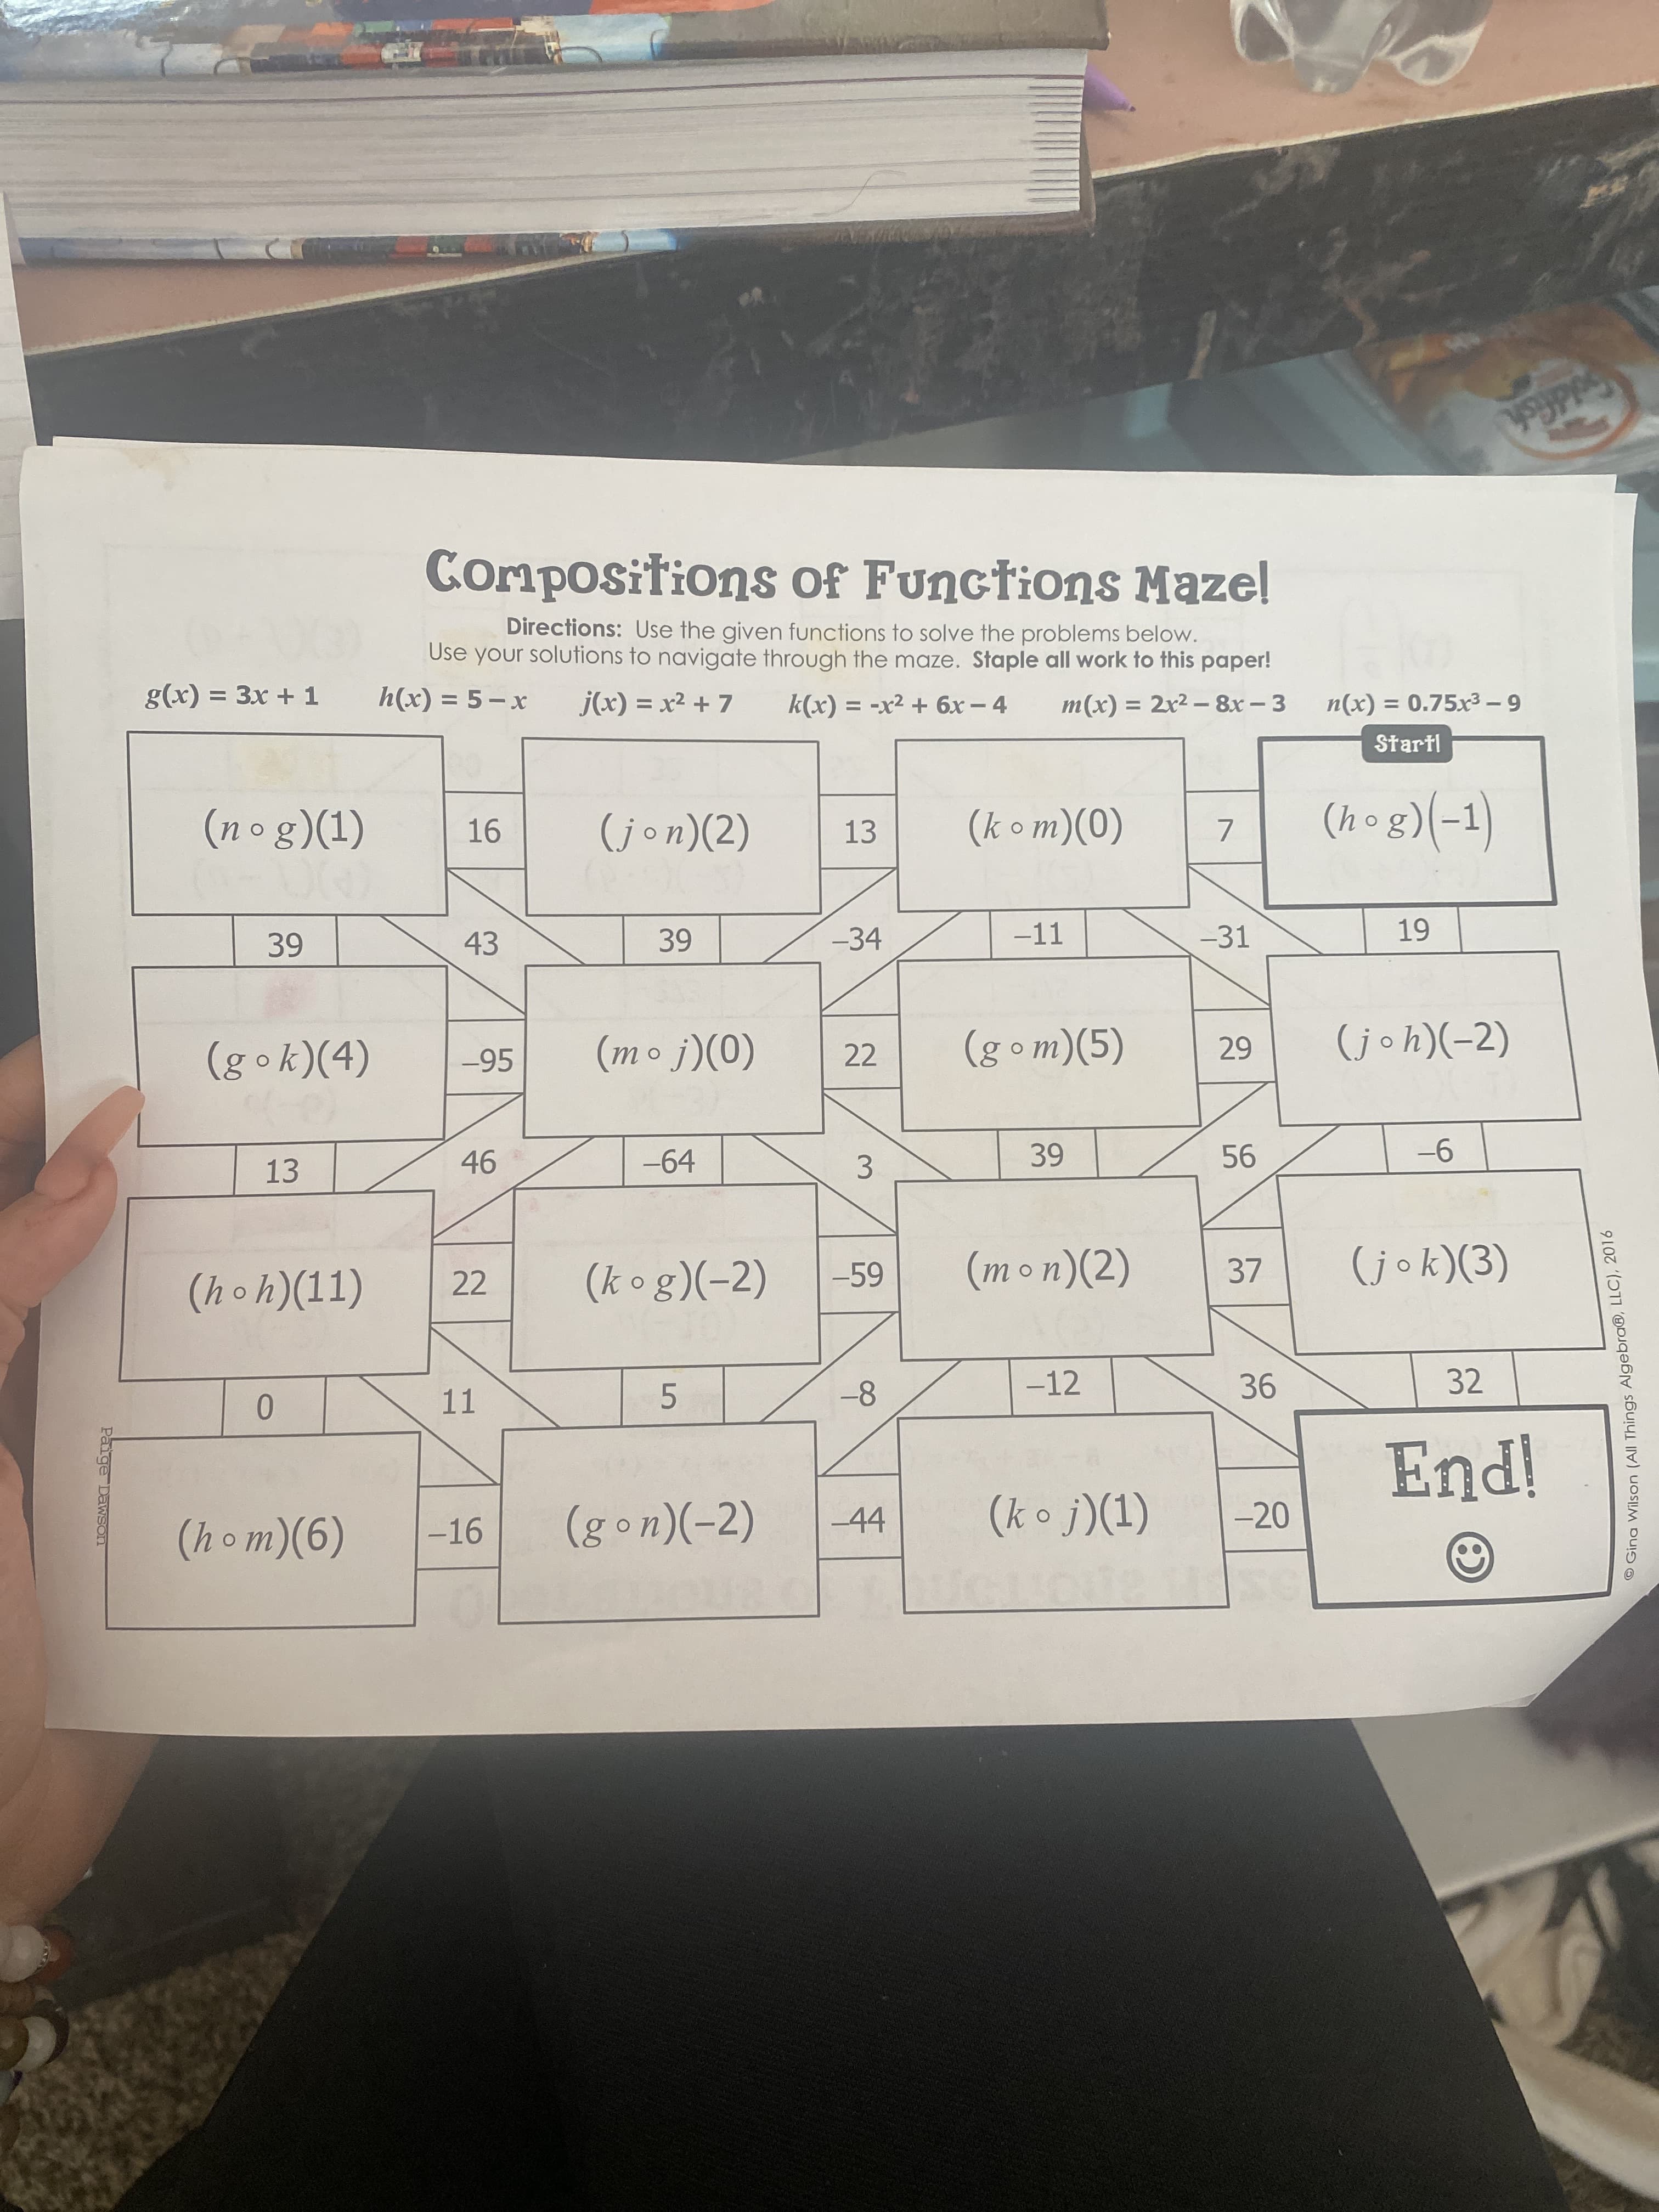 O Gina Wilson (All Things Algebra®, LLC), 2016
3.
Paige Dawson
Goldfish
Compositions of Functions Maze!
Directions: Use the given functions to solve the problems below.
Use your solutions to navigate through the maze. Staple all work to this paper!
g(x) = 3x + 1
j(x) = x2 + 7
k(x) = -x2 + 6x - 4
m(x) = 2x2 -8x - 3
%3D
6 - X (x)u
%3D
Startl
(nog)(1)
(jon)(2)
(hog)(-1)
13
(0)(uo Y)
-34
-11
-31
43
22
(gom)(5)
-95
(b)(y•8)
(0)(! • u)
-64
9-
13
(k og)(-2)
(mon)(2)
37
(hoh)(11)
22
-12
32
-8
11
5.
(k o j)(1)
-20
-16
(g on)(-2)
-44
